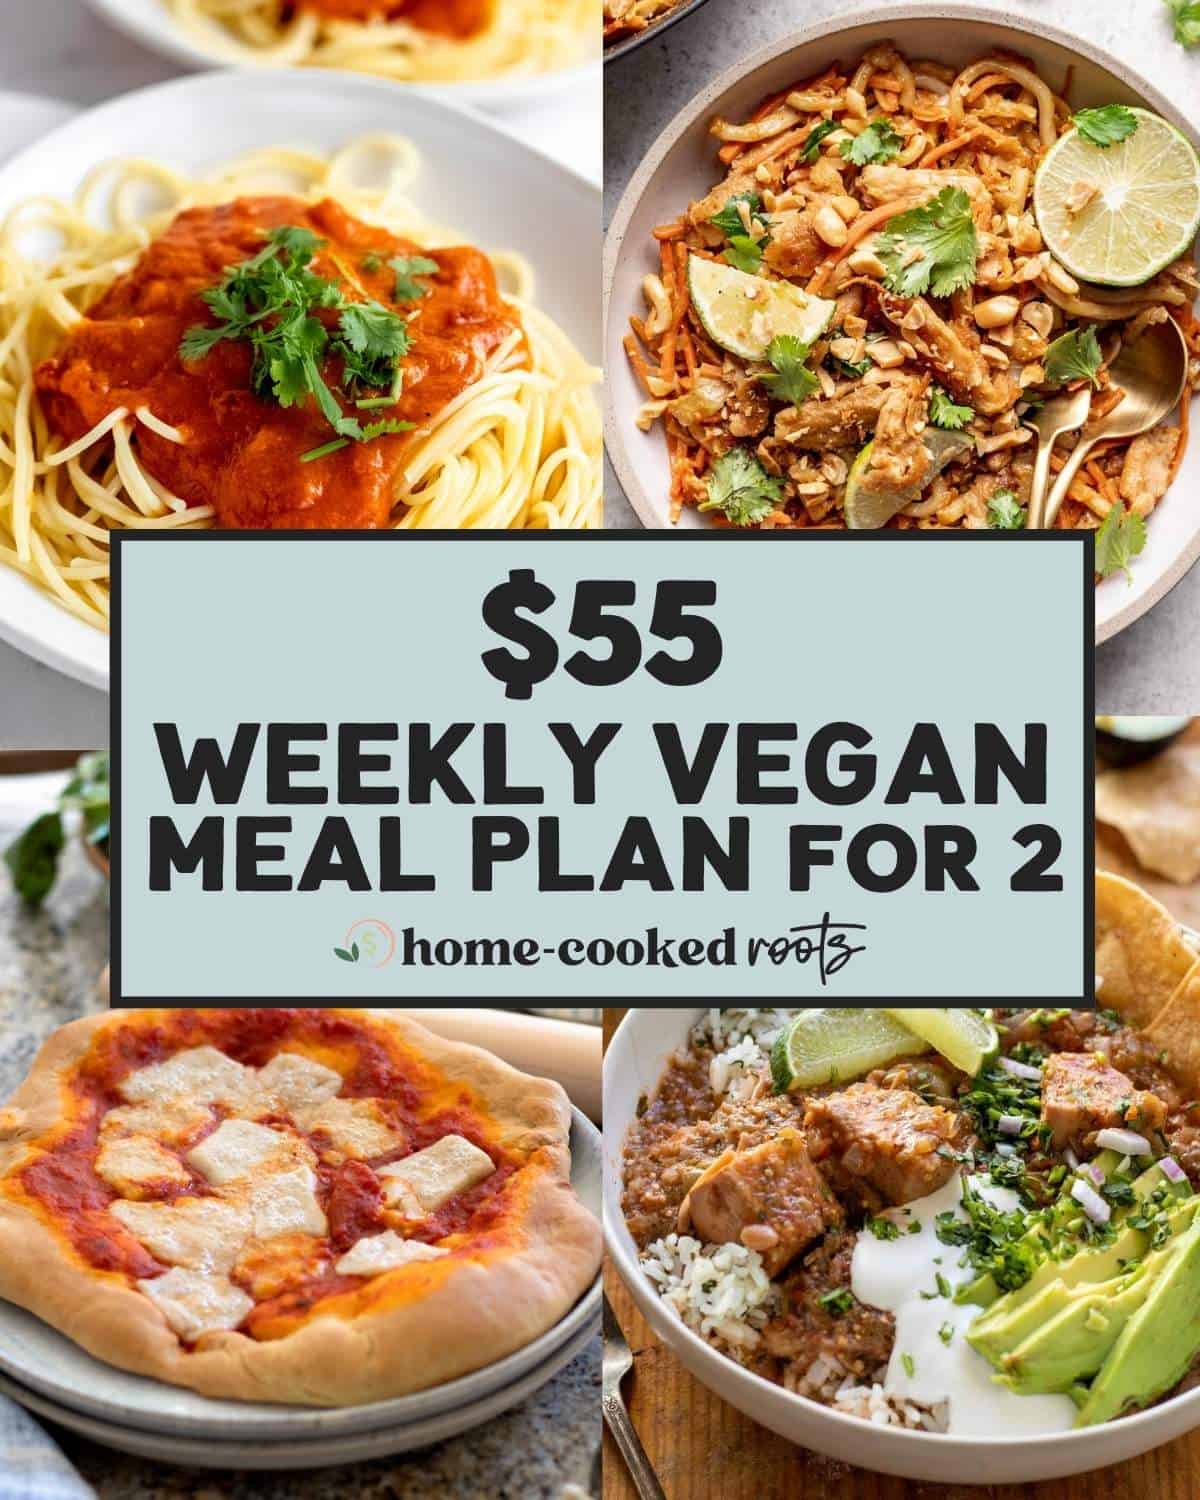 Collage of 4 vegan dinner recipes for weekly meal plan under $55.